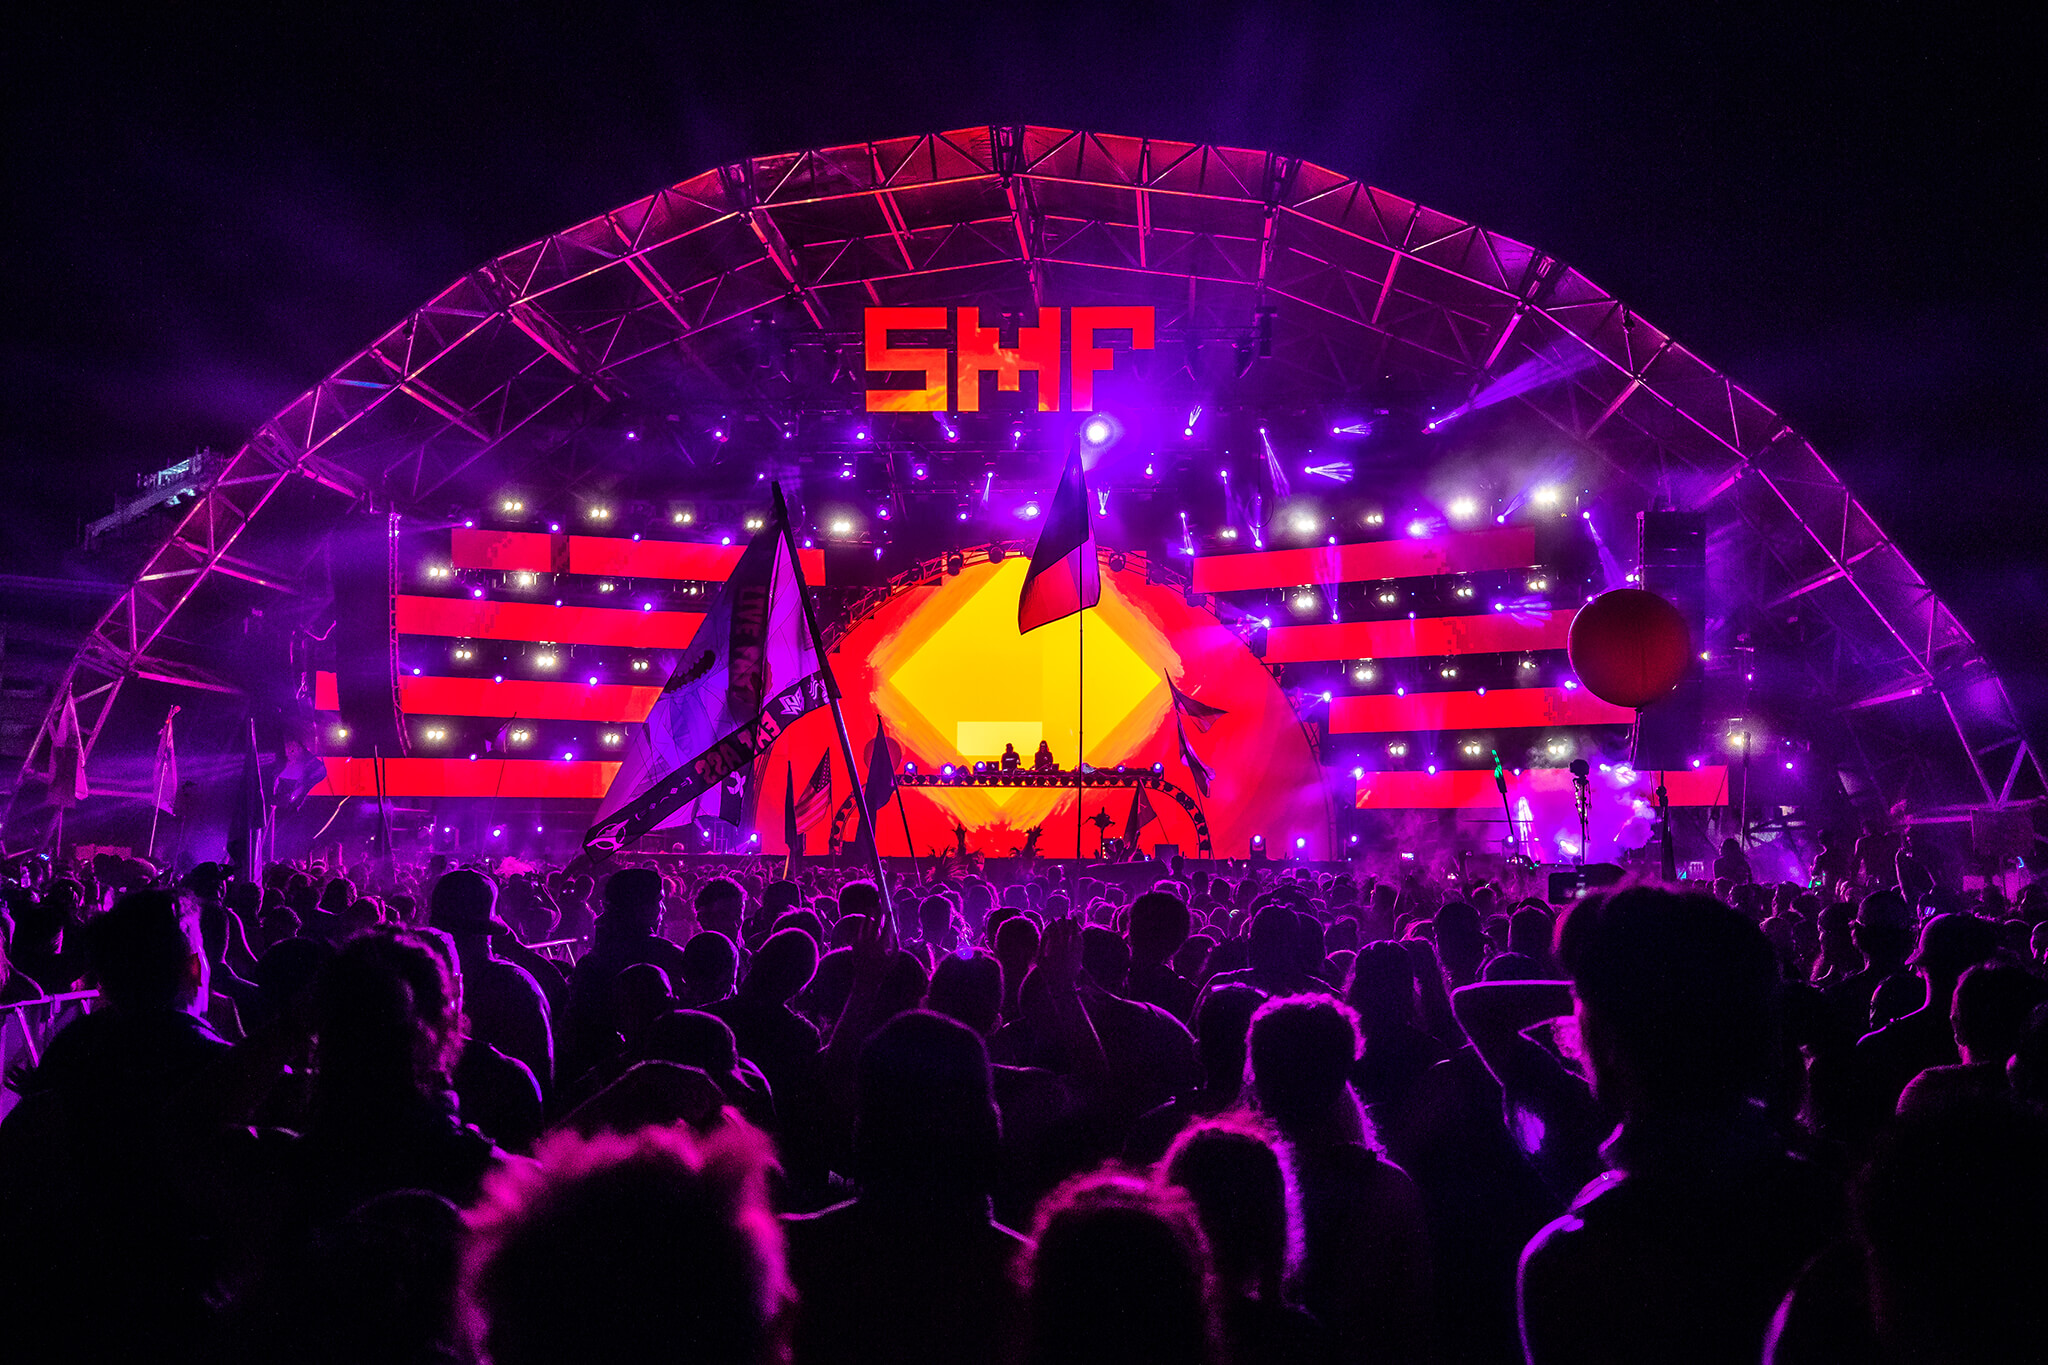 Introducing the Complete Lineup for SMF 2018!